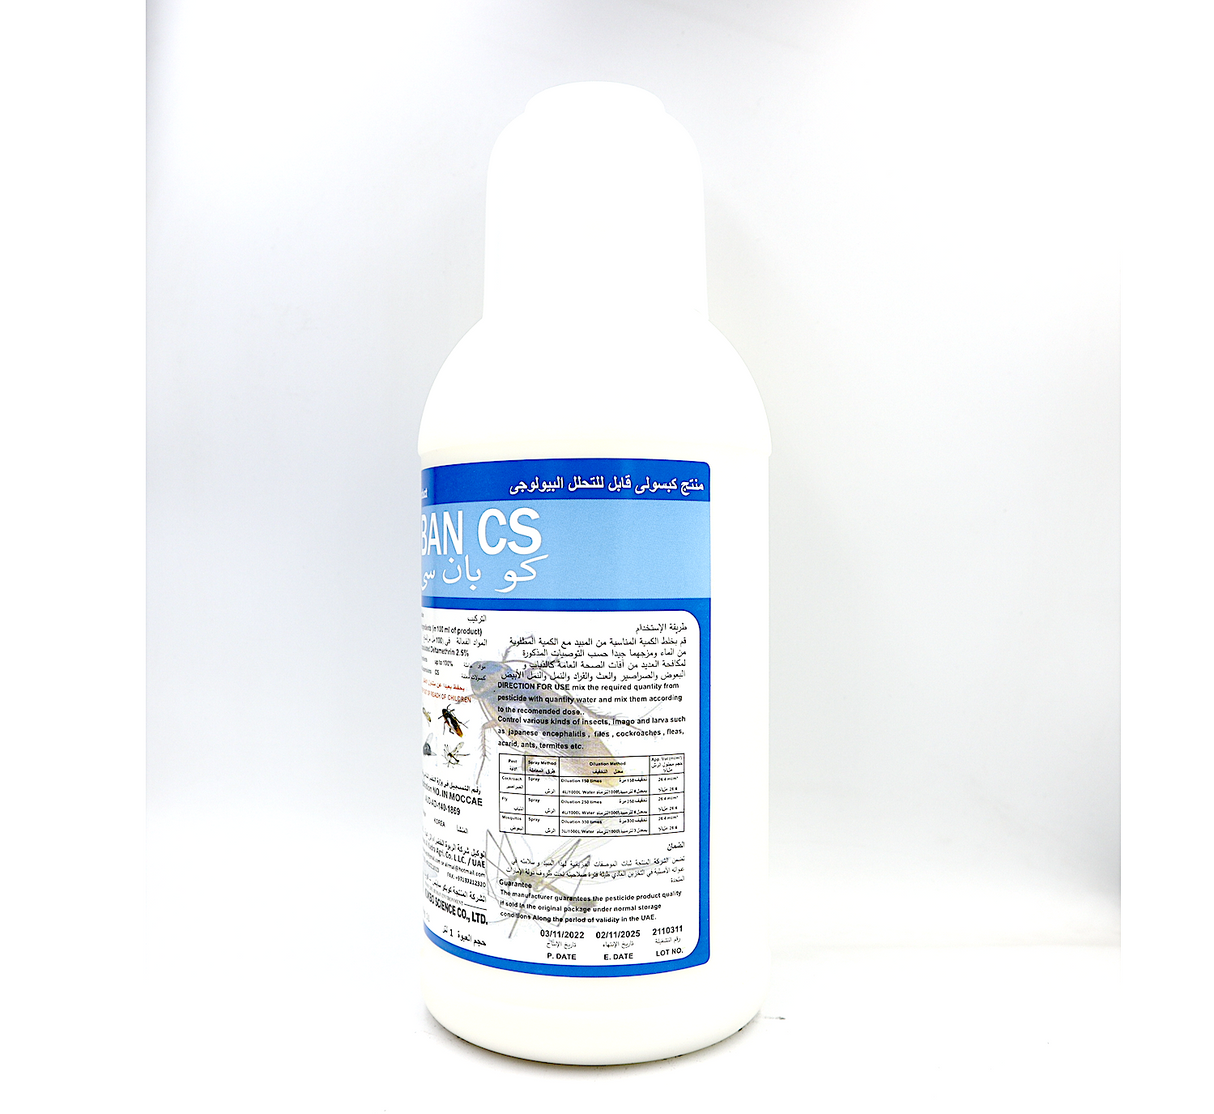 KOBAN® CS Bio-Degradible Microcapsulated Public Health Insecticide 1 Ltr